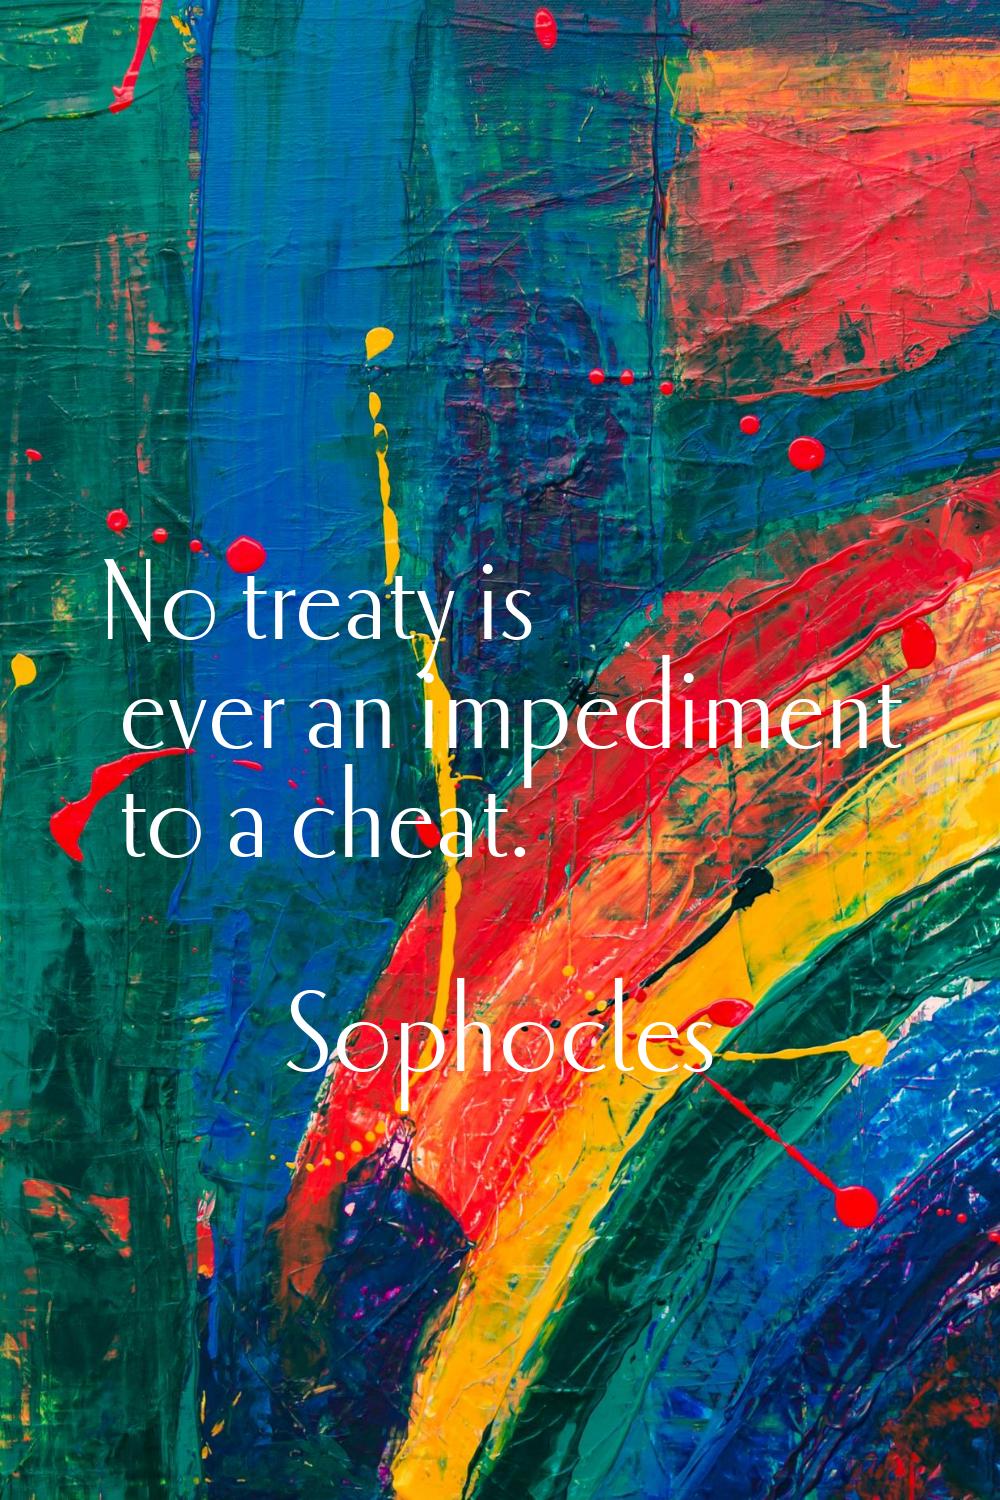 No treaty is ever an impediment to a cheat.